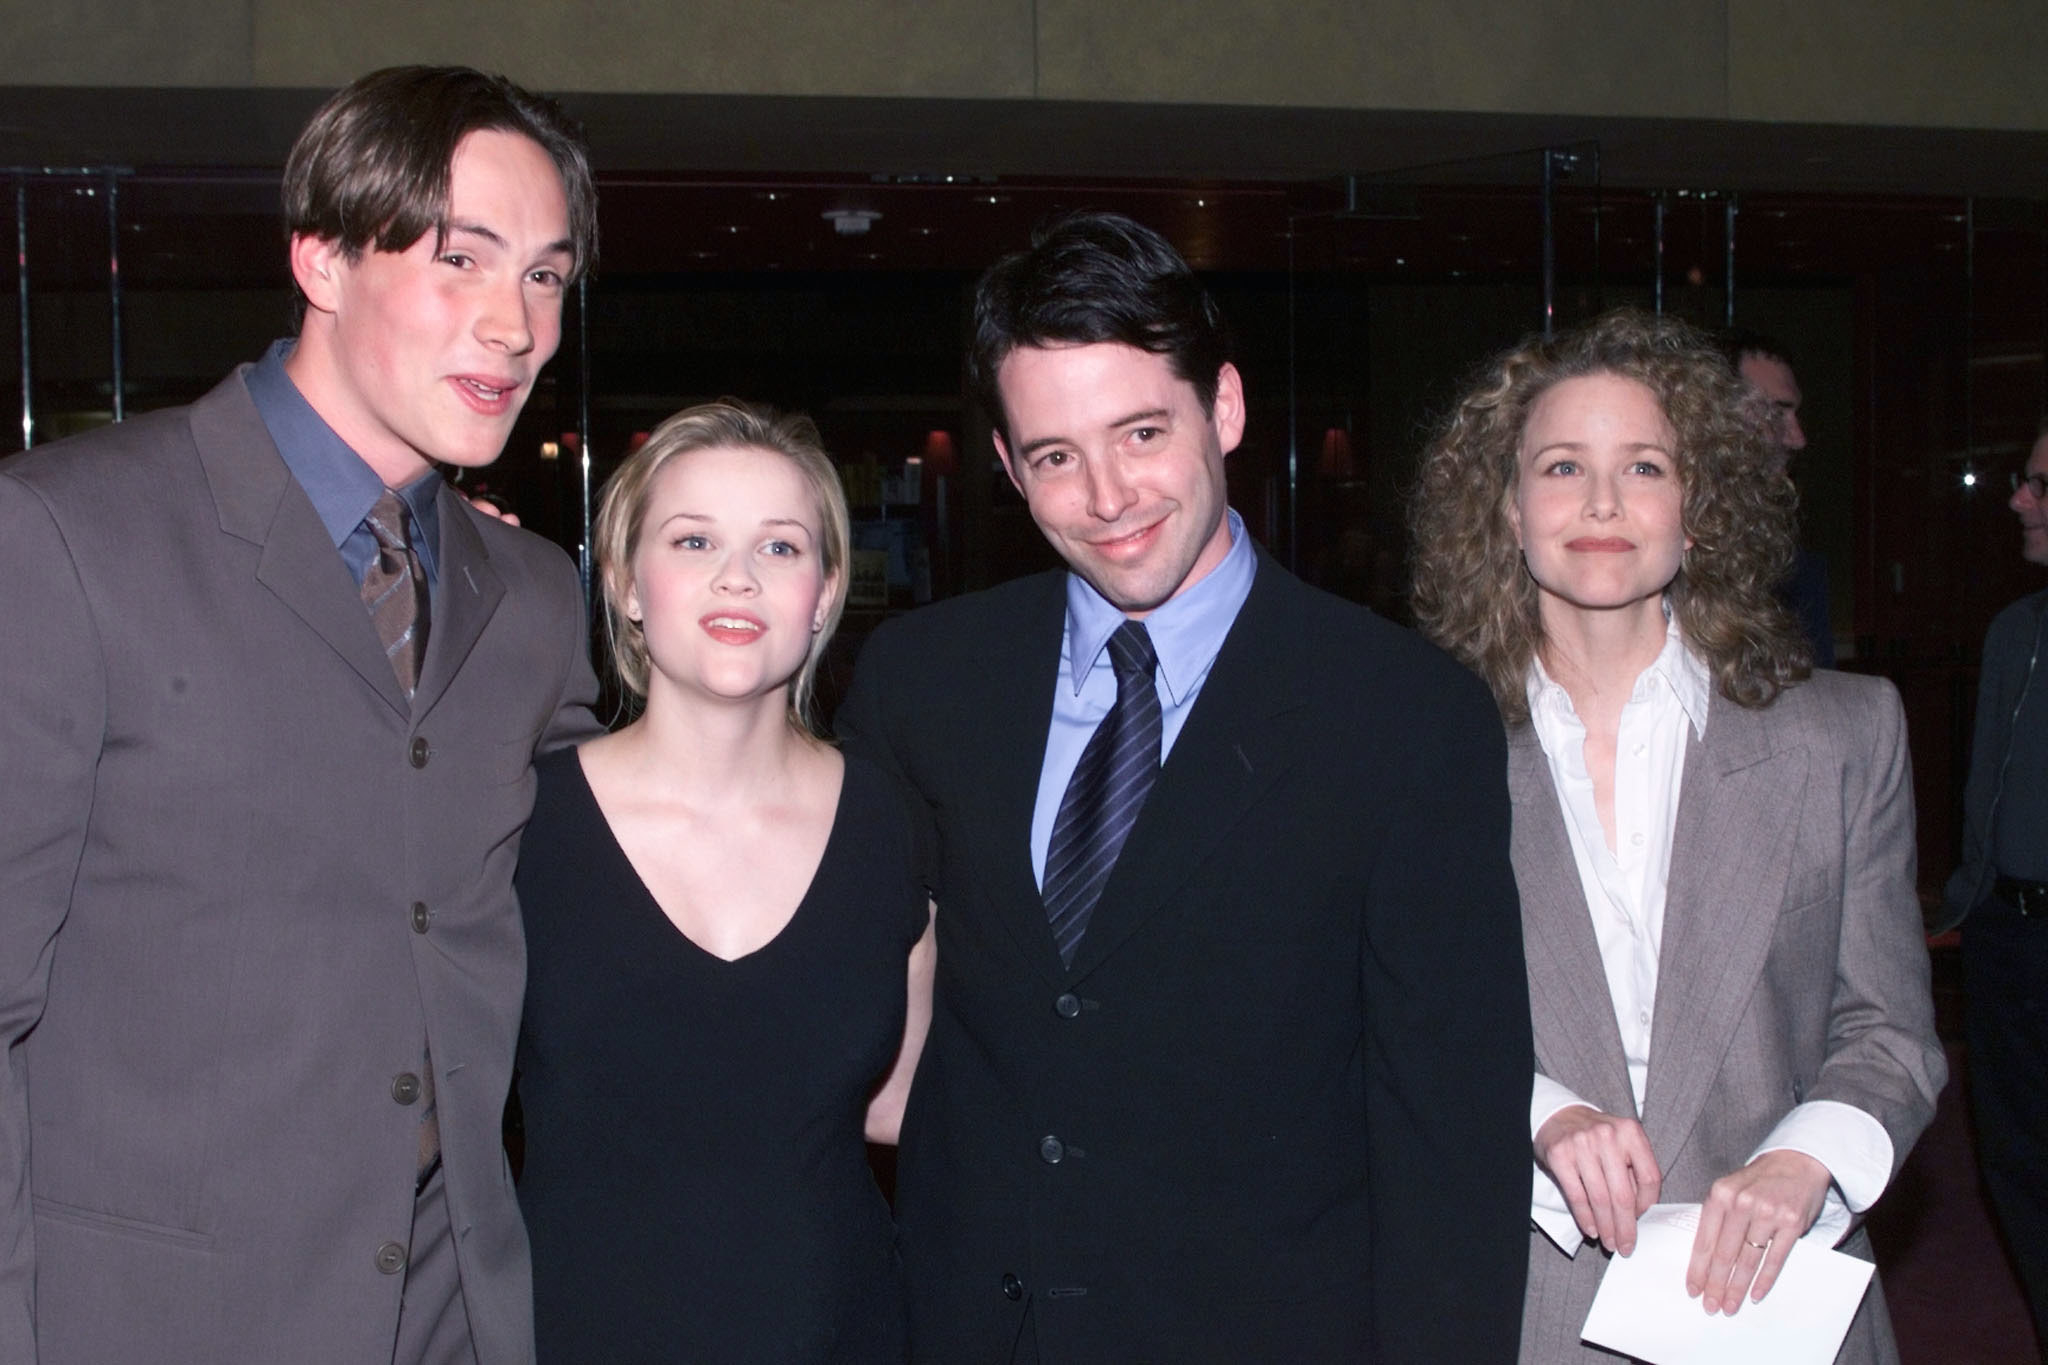 Chris Klein, Reese Witherspoon, Matthew Broderick and Molly Hagan.